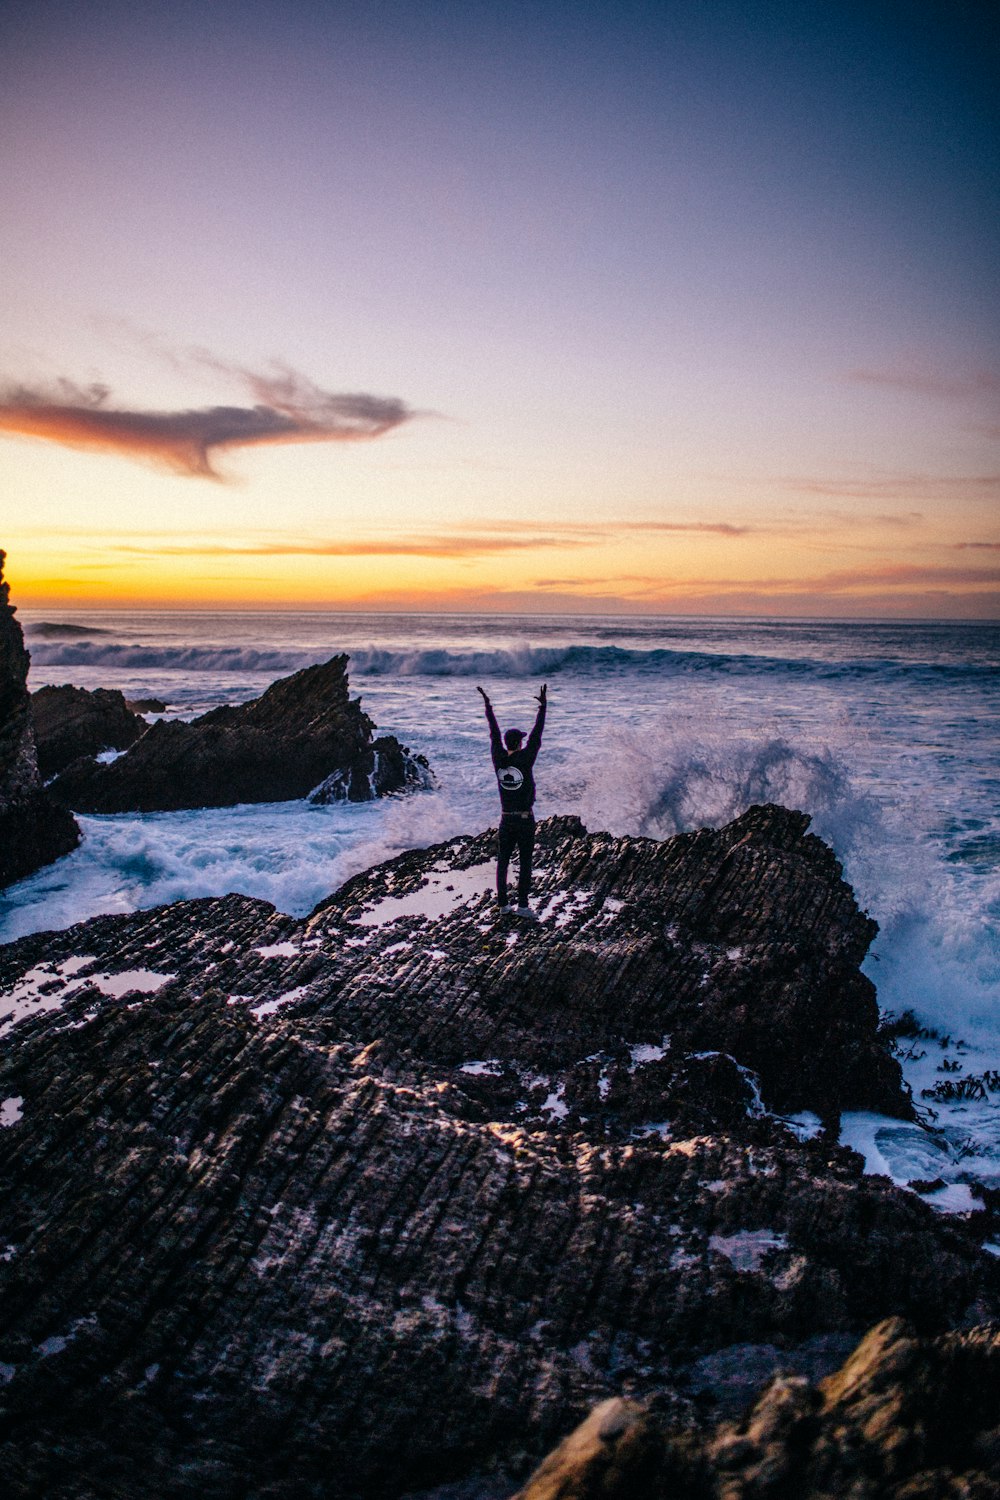 person standing on rock formation near sea during sunset